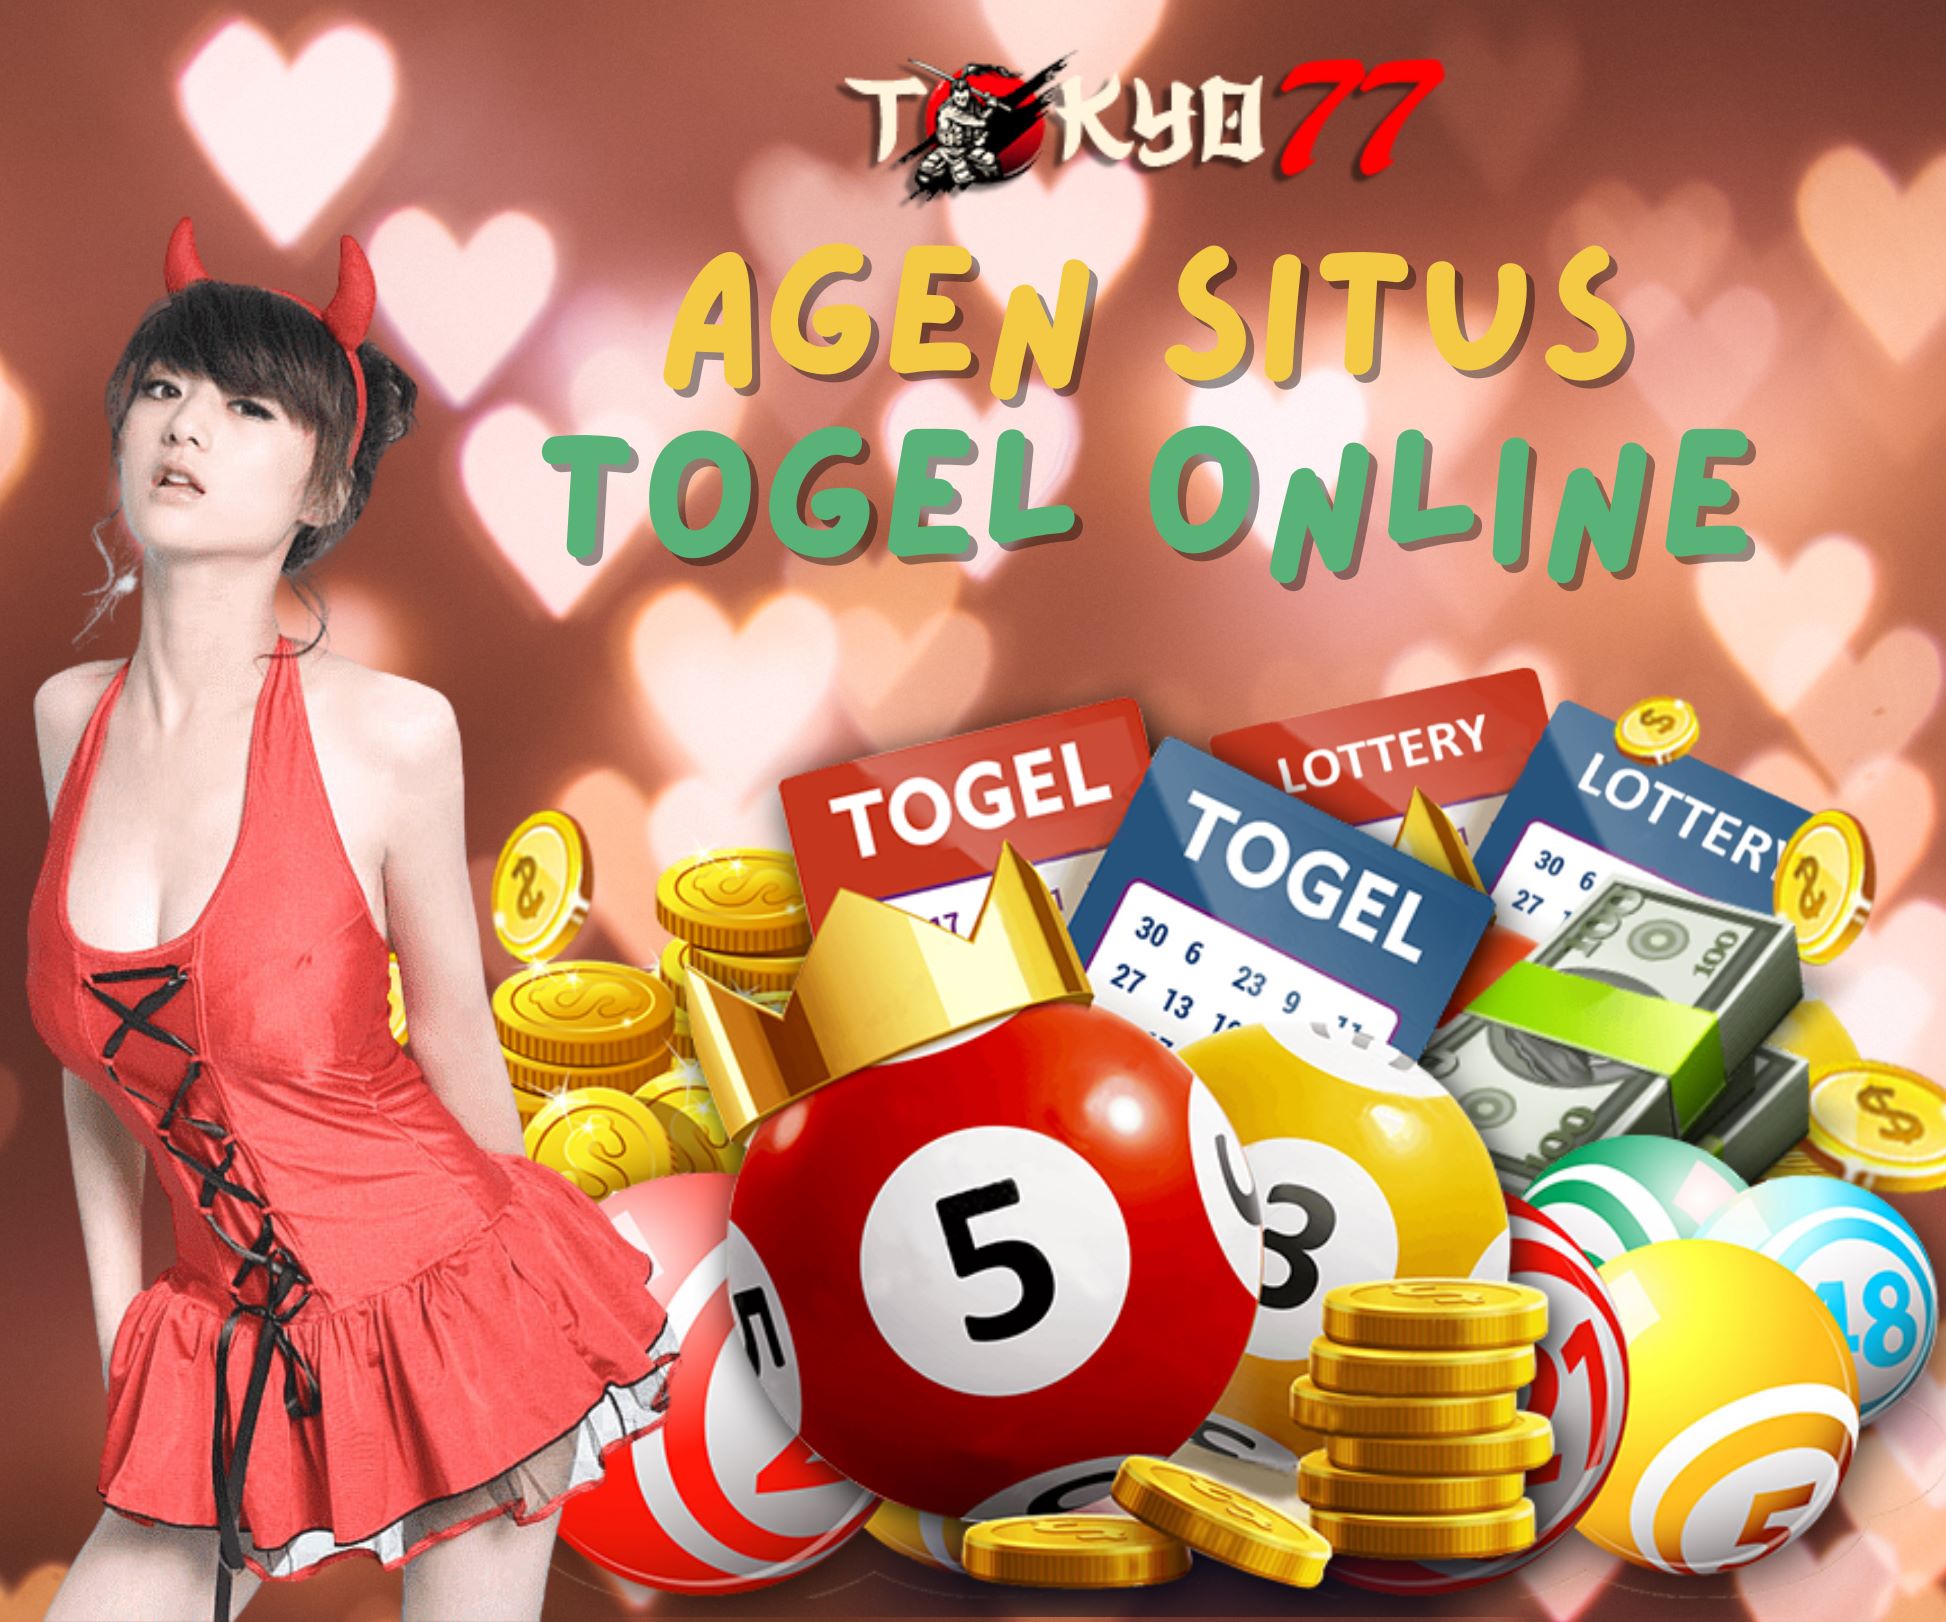 Place your bet from Sweet Dreams at Togel Online